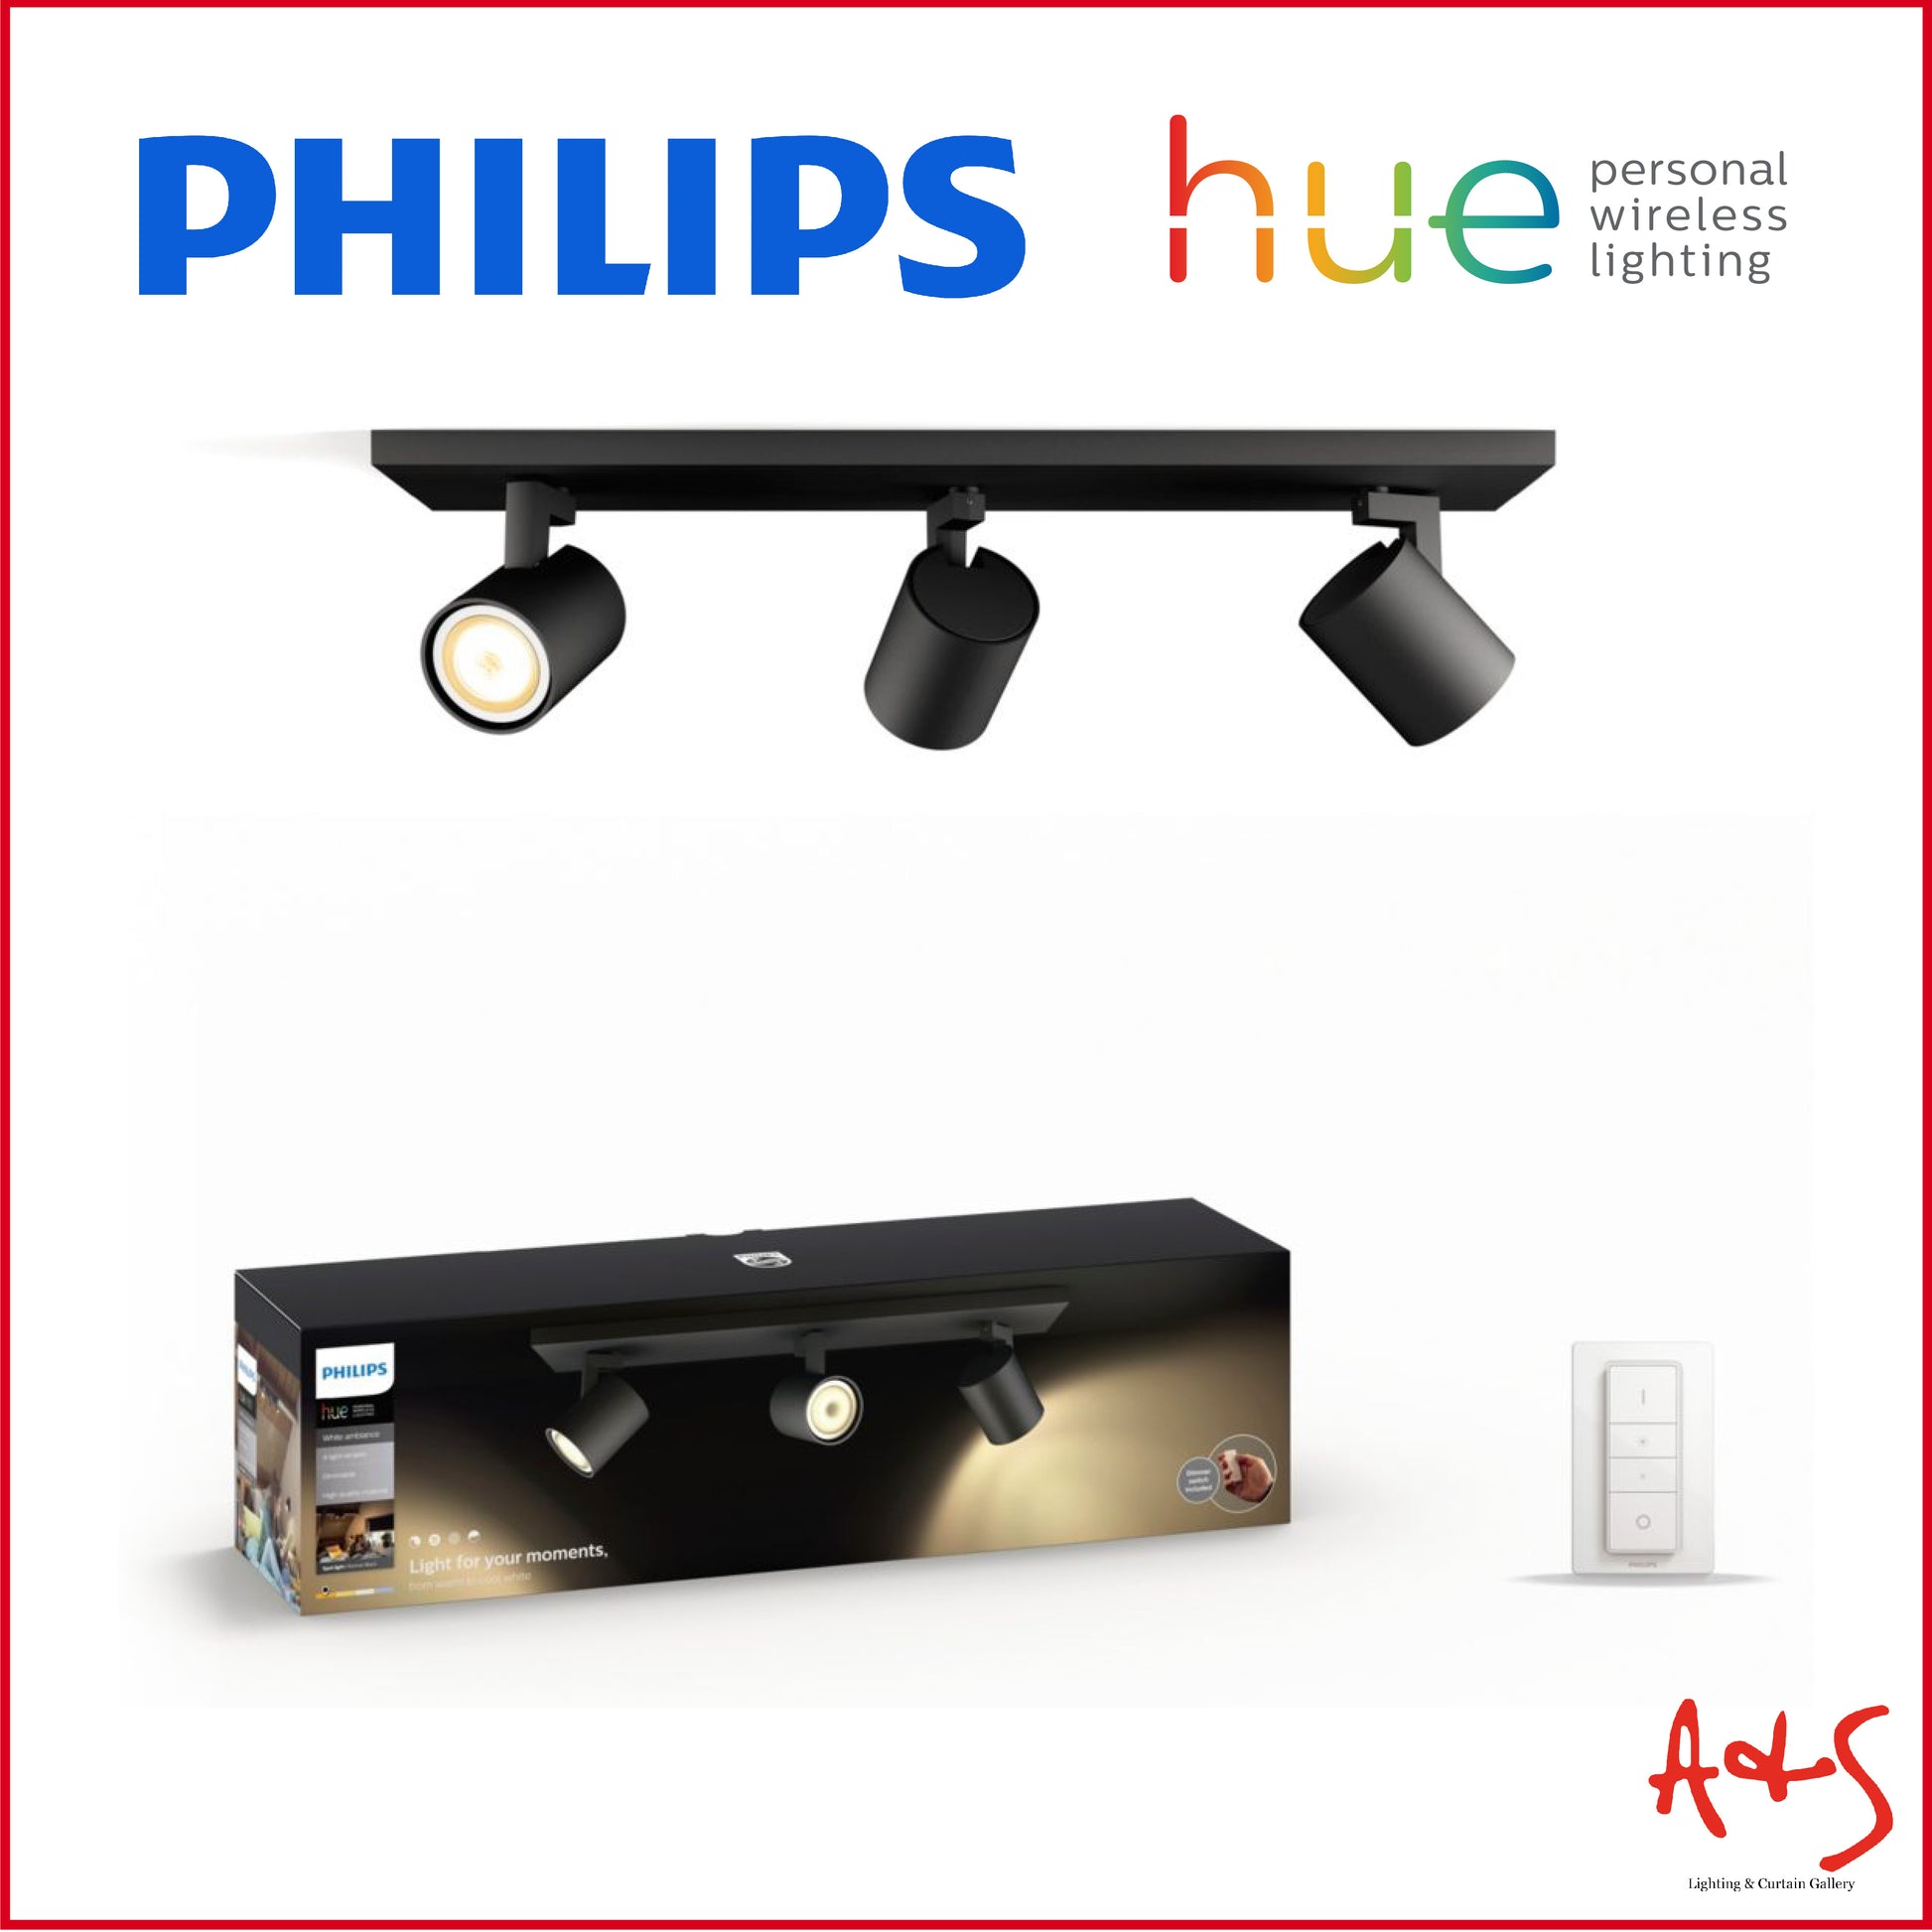 Philips HUE Ambiance 5W GU10 Bulb – A&S Lighting and Curtain Gallery